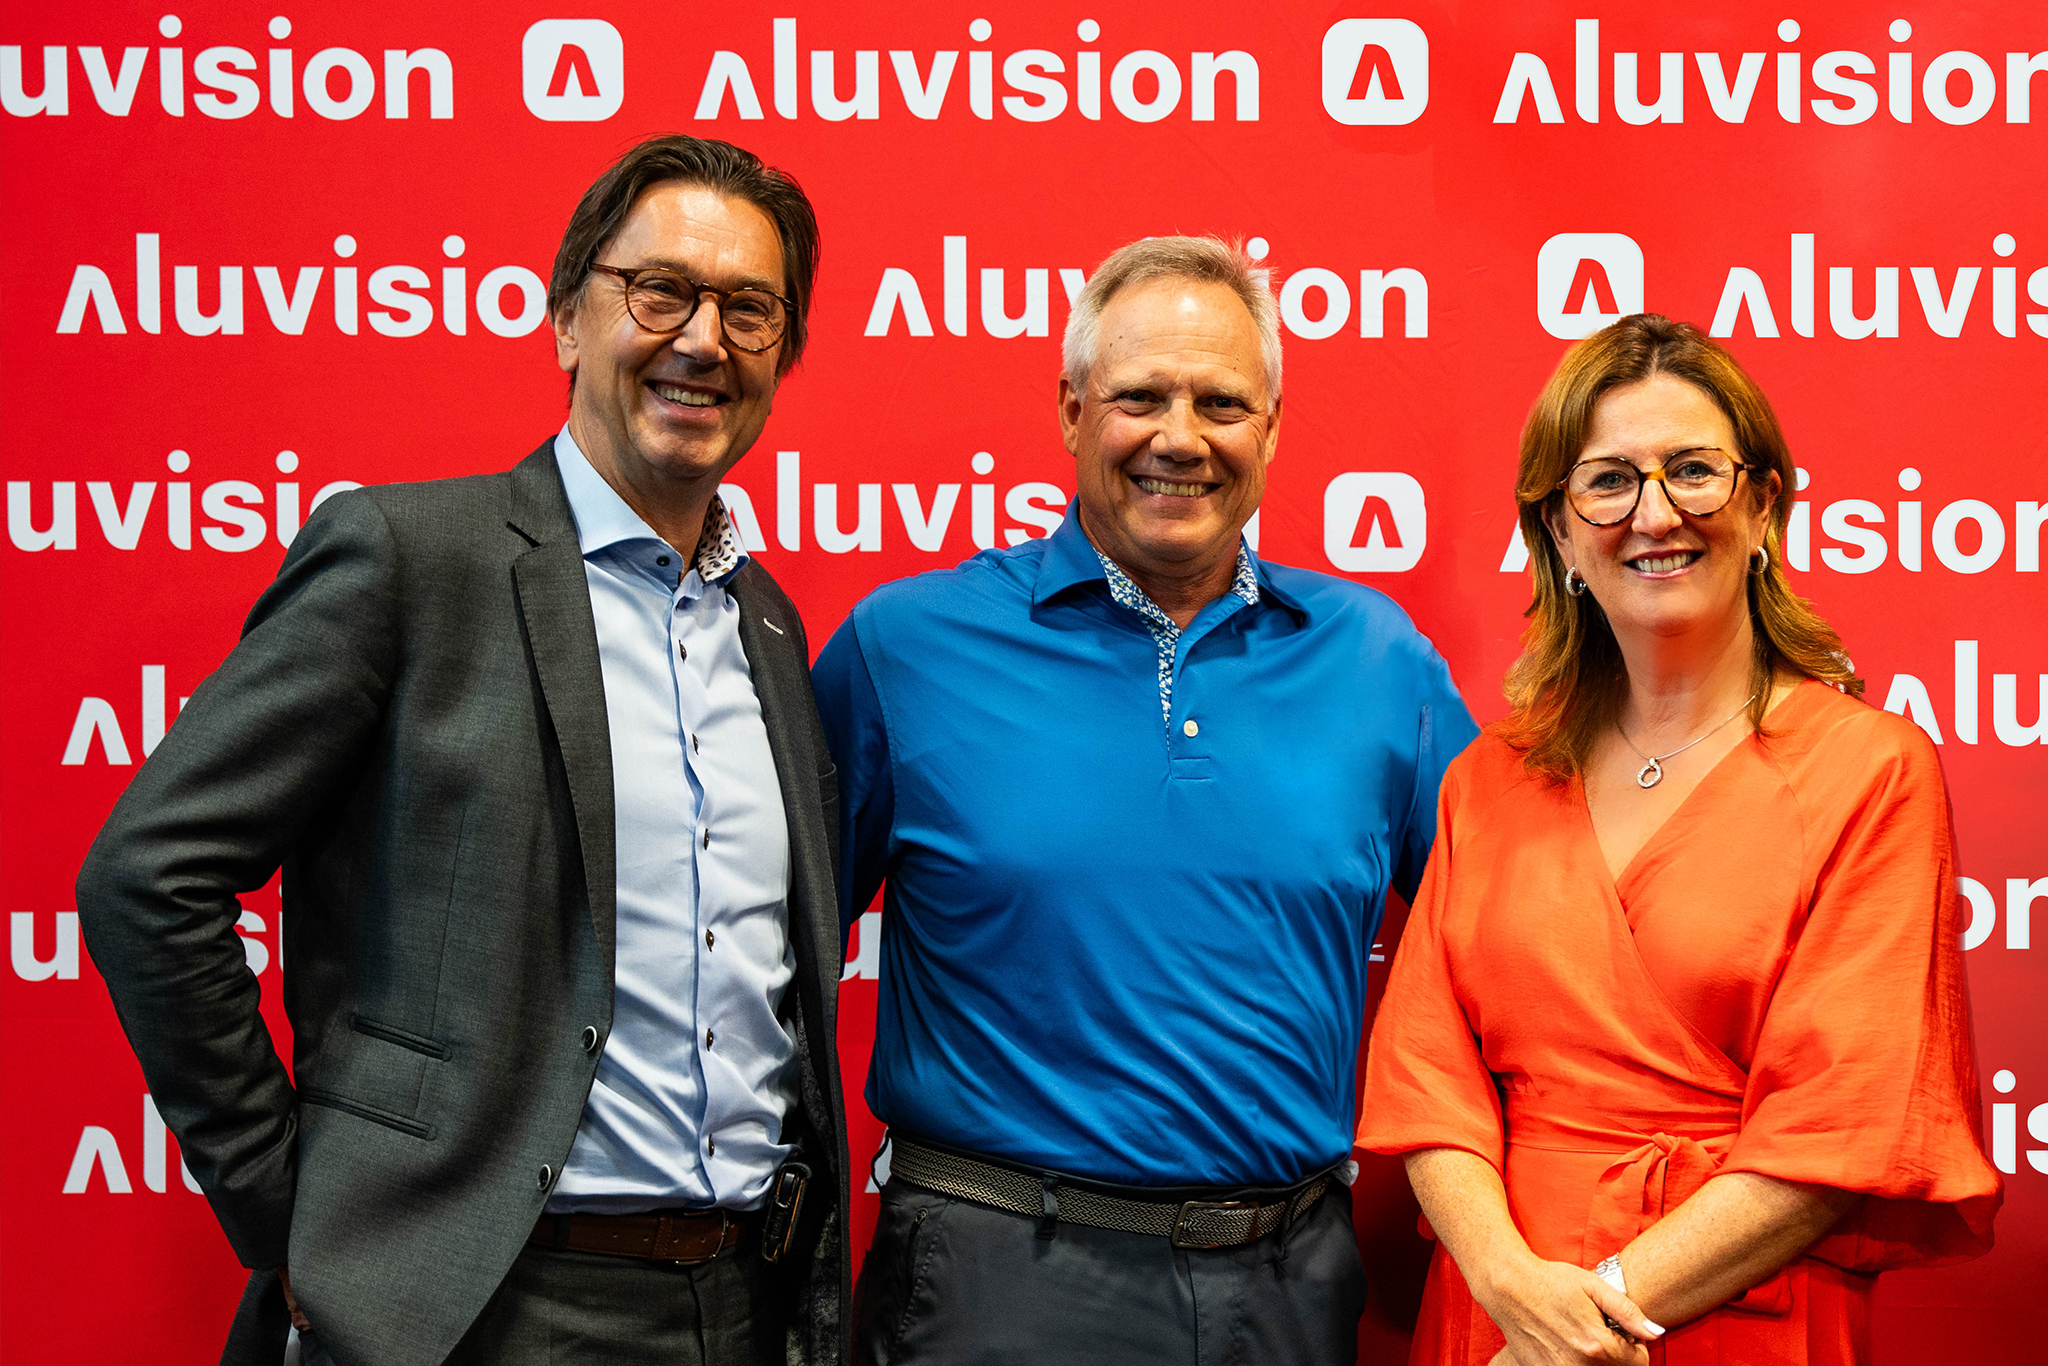 Robert Laarhoven joins Aluvision as Corporate Strategy Advisor